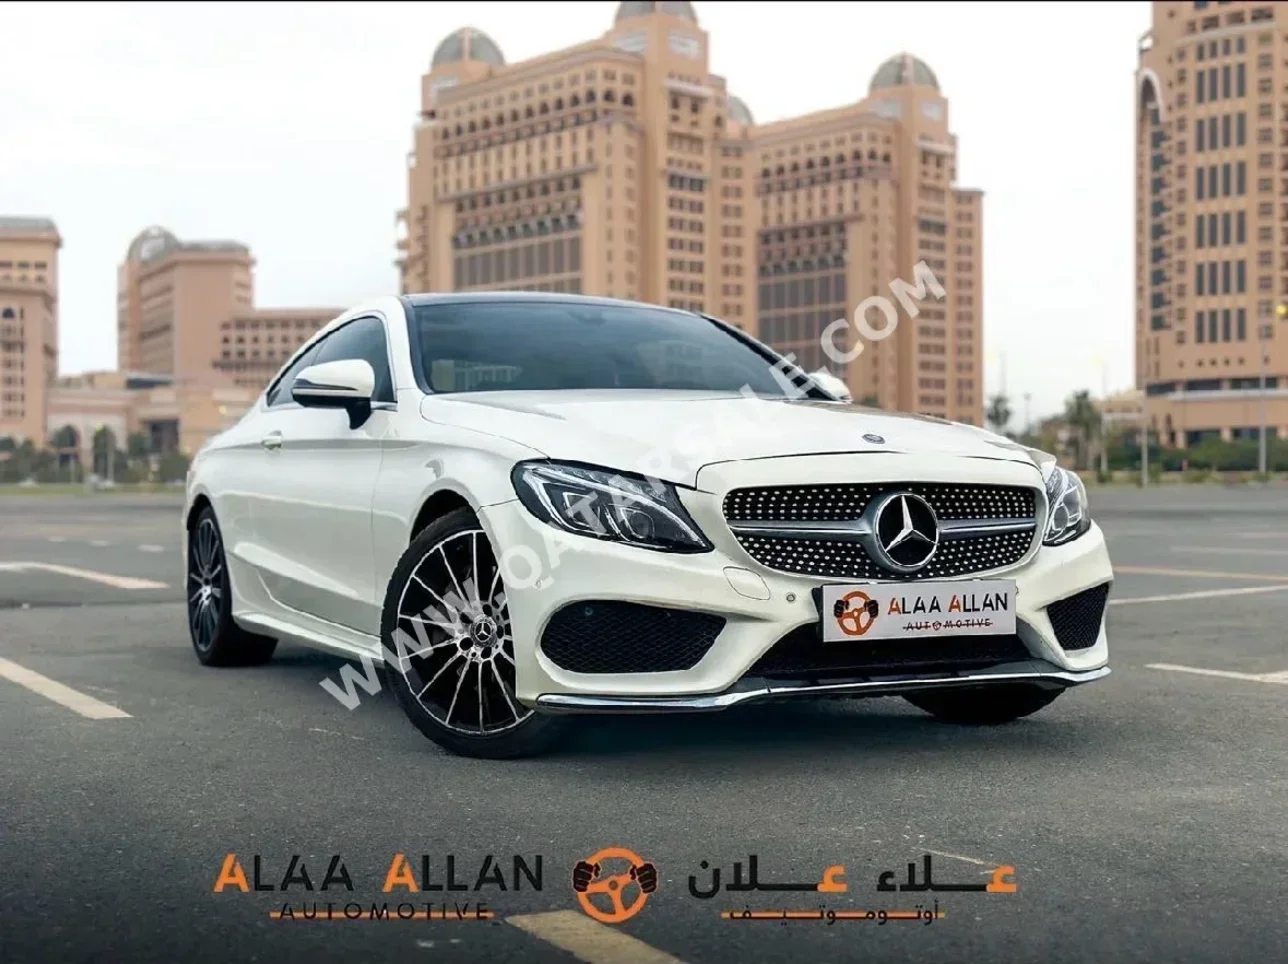 Mercedes-Benz  C-Class  350  2017  Automatic  183,000 Km  4 Cylinder  Rear Wheel Drive (RWD)  Coupe / Sport  White